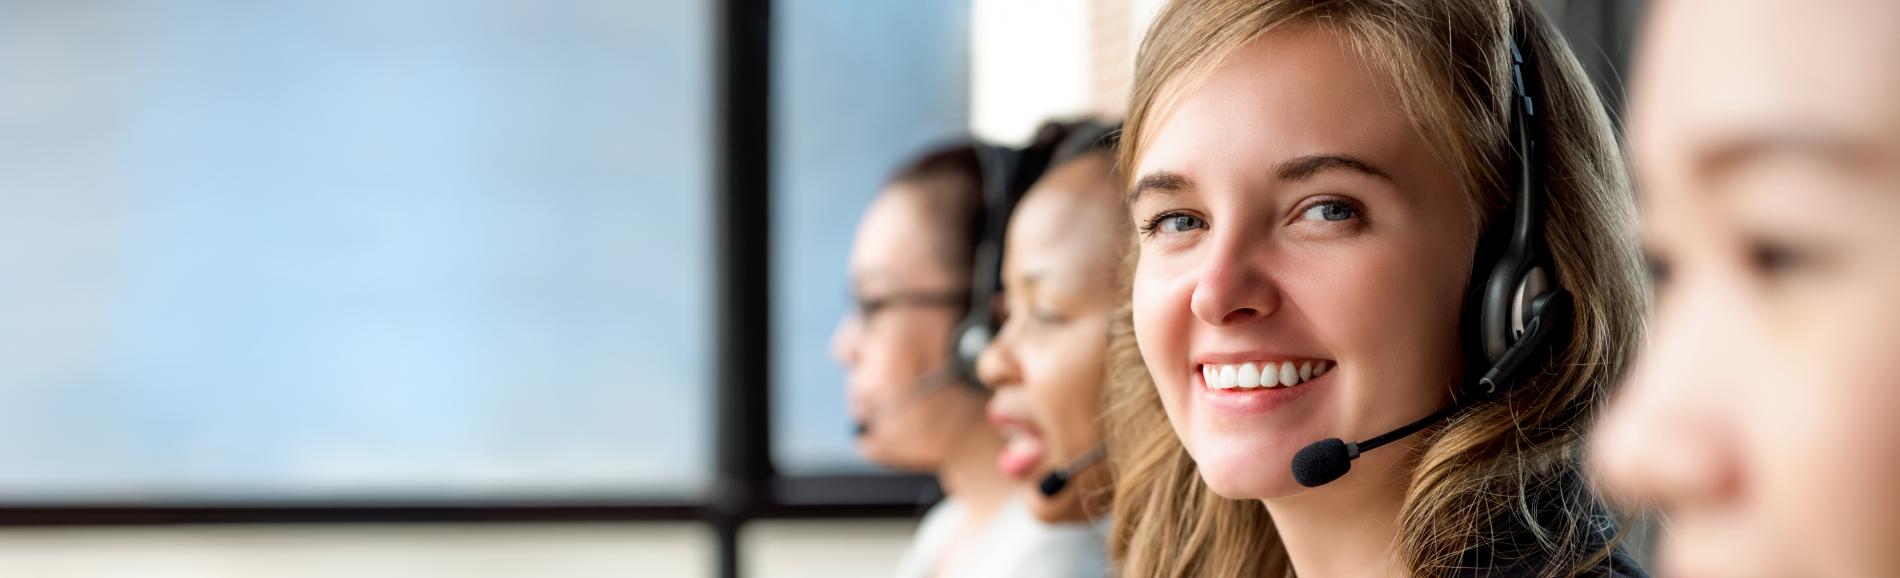 Call center woman smiling at the camera